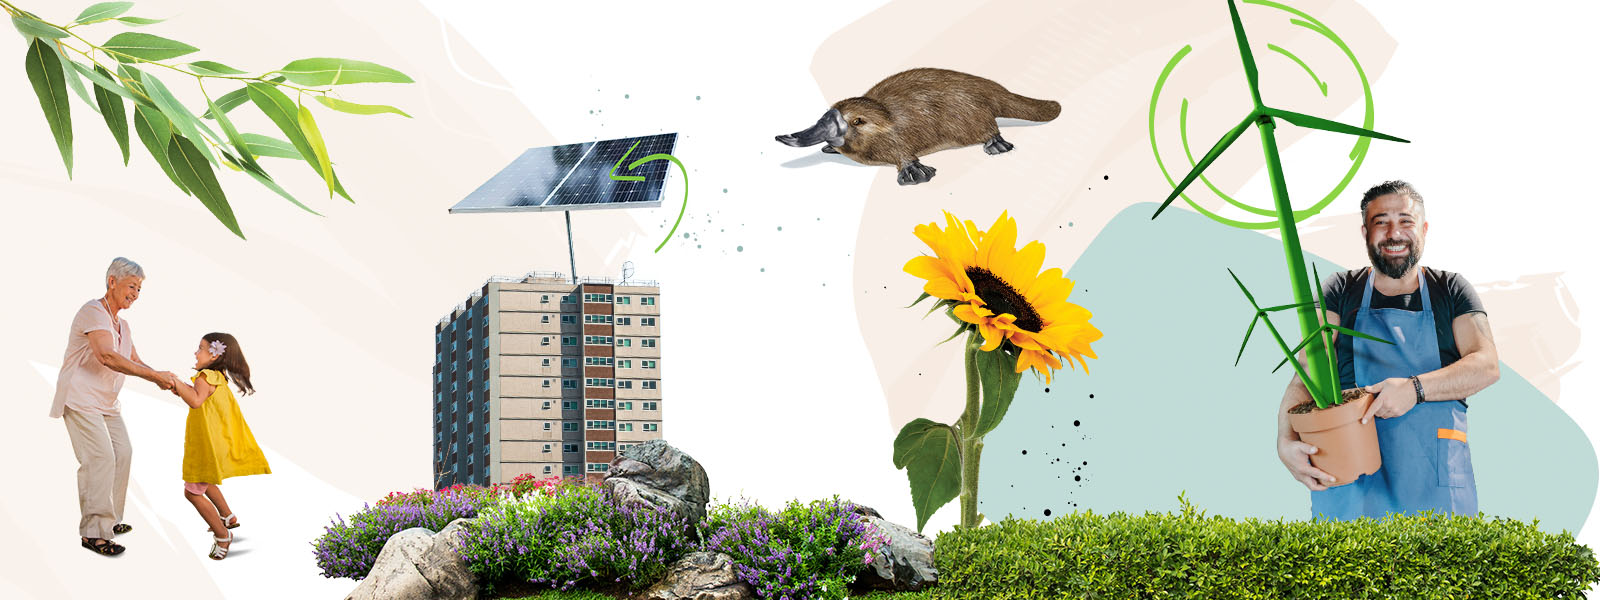 Collage of people dancing, solar panels on a building, a big sunflower and a man holding a plant.  